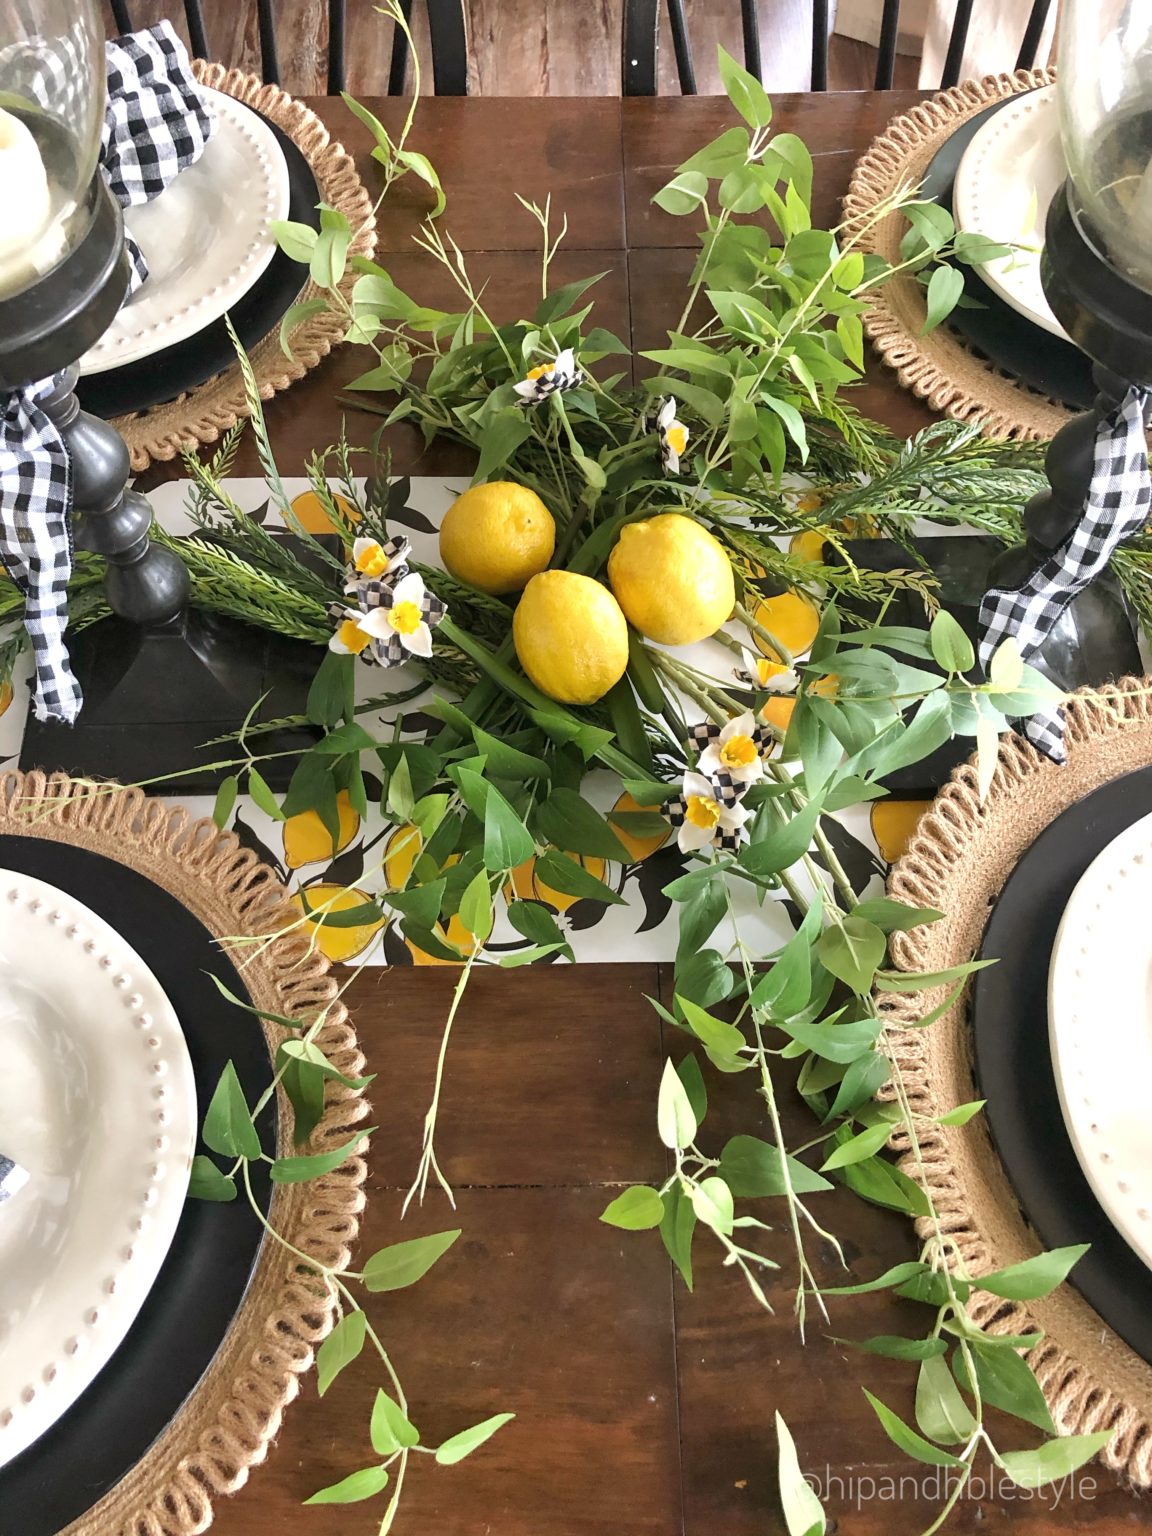 How To Create A Beautiful Lemon Themed Table * Hip & Humble Style